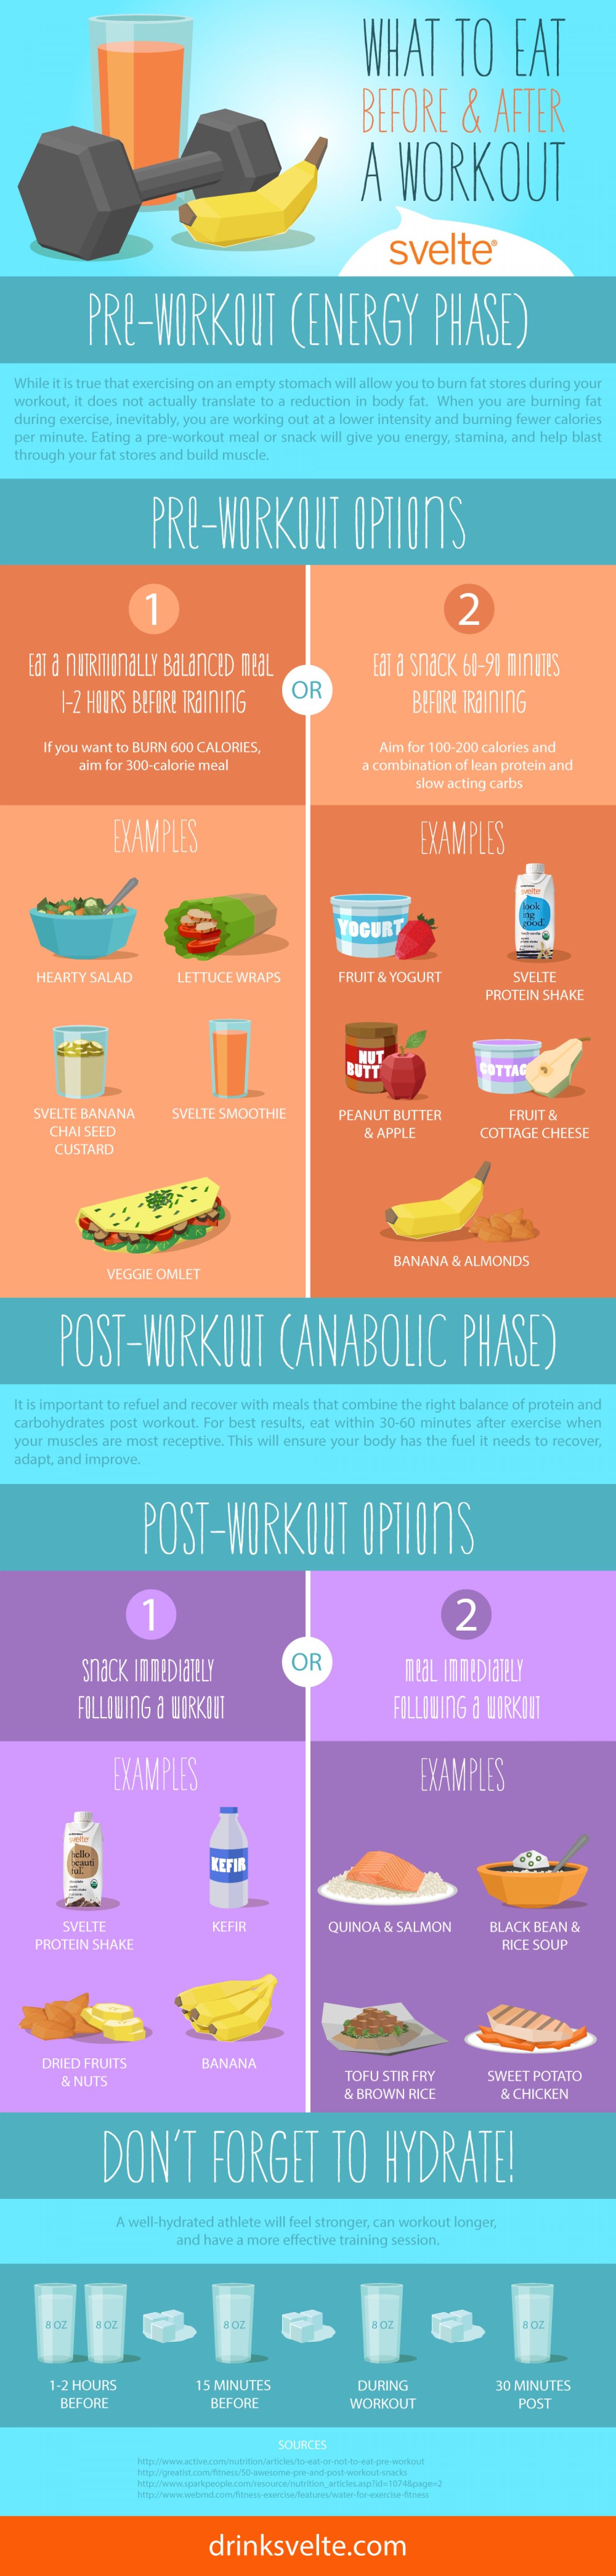 What to Eat Before and After Your Workouts